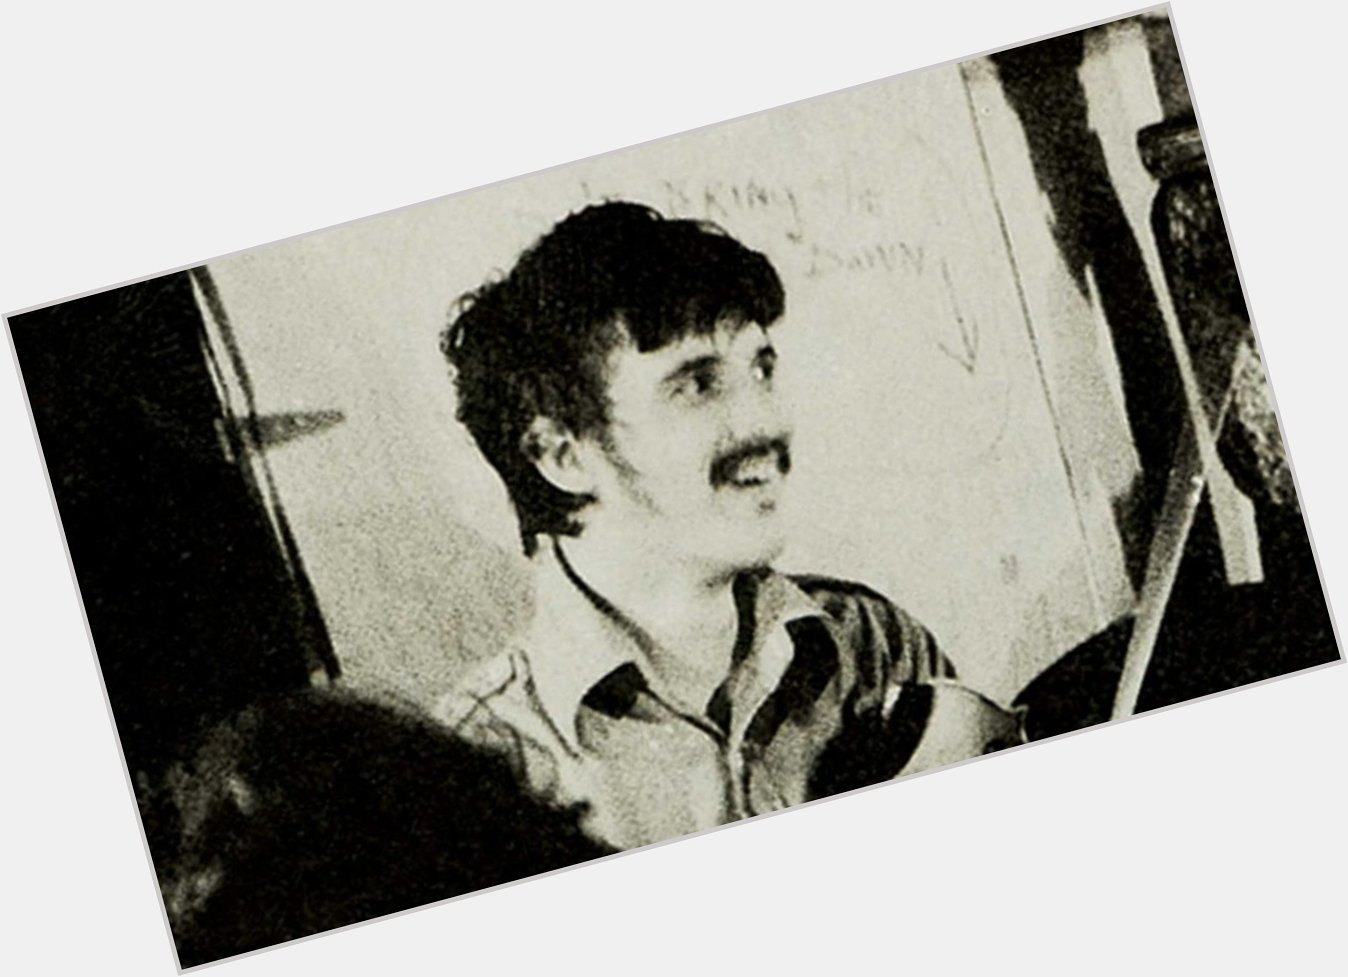 Happy Birthday Rick Danko: Performing Live With The Band In 1973  